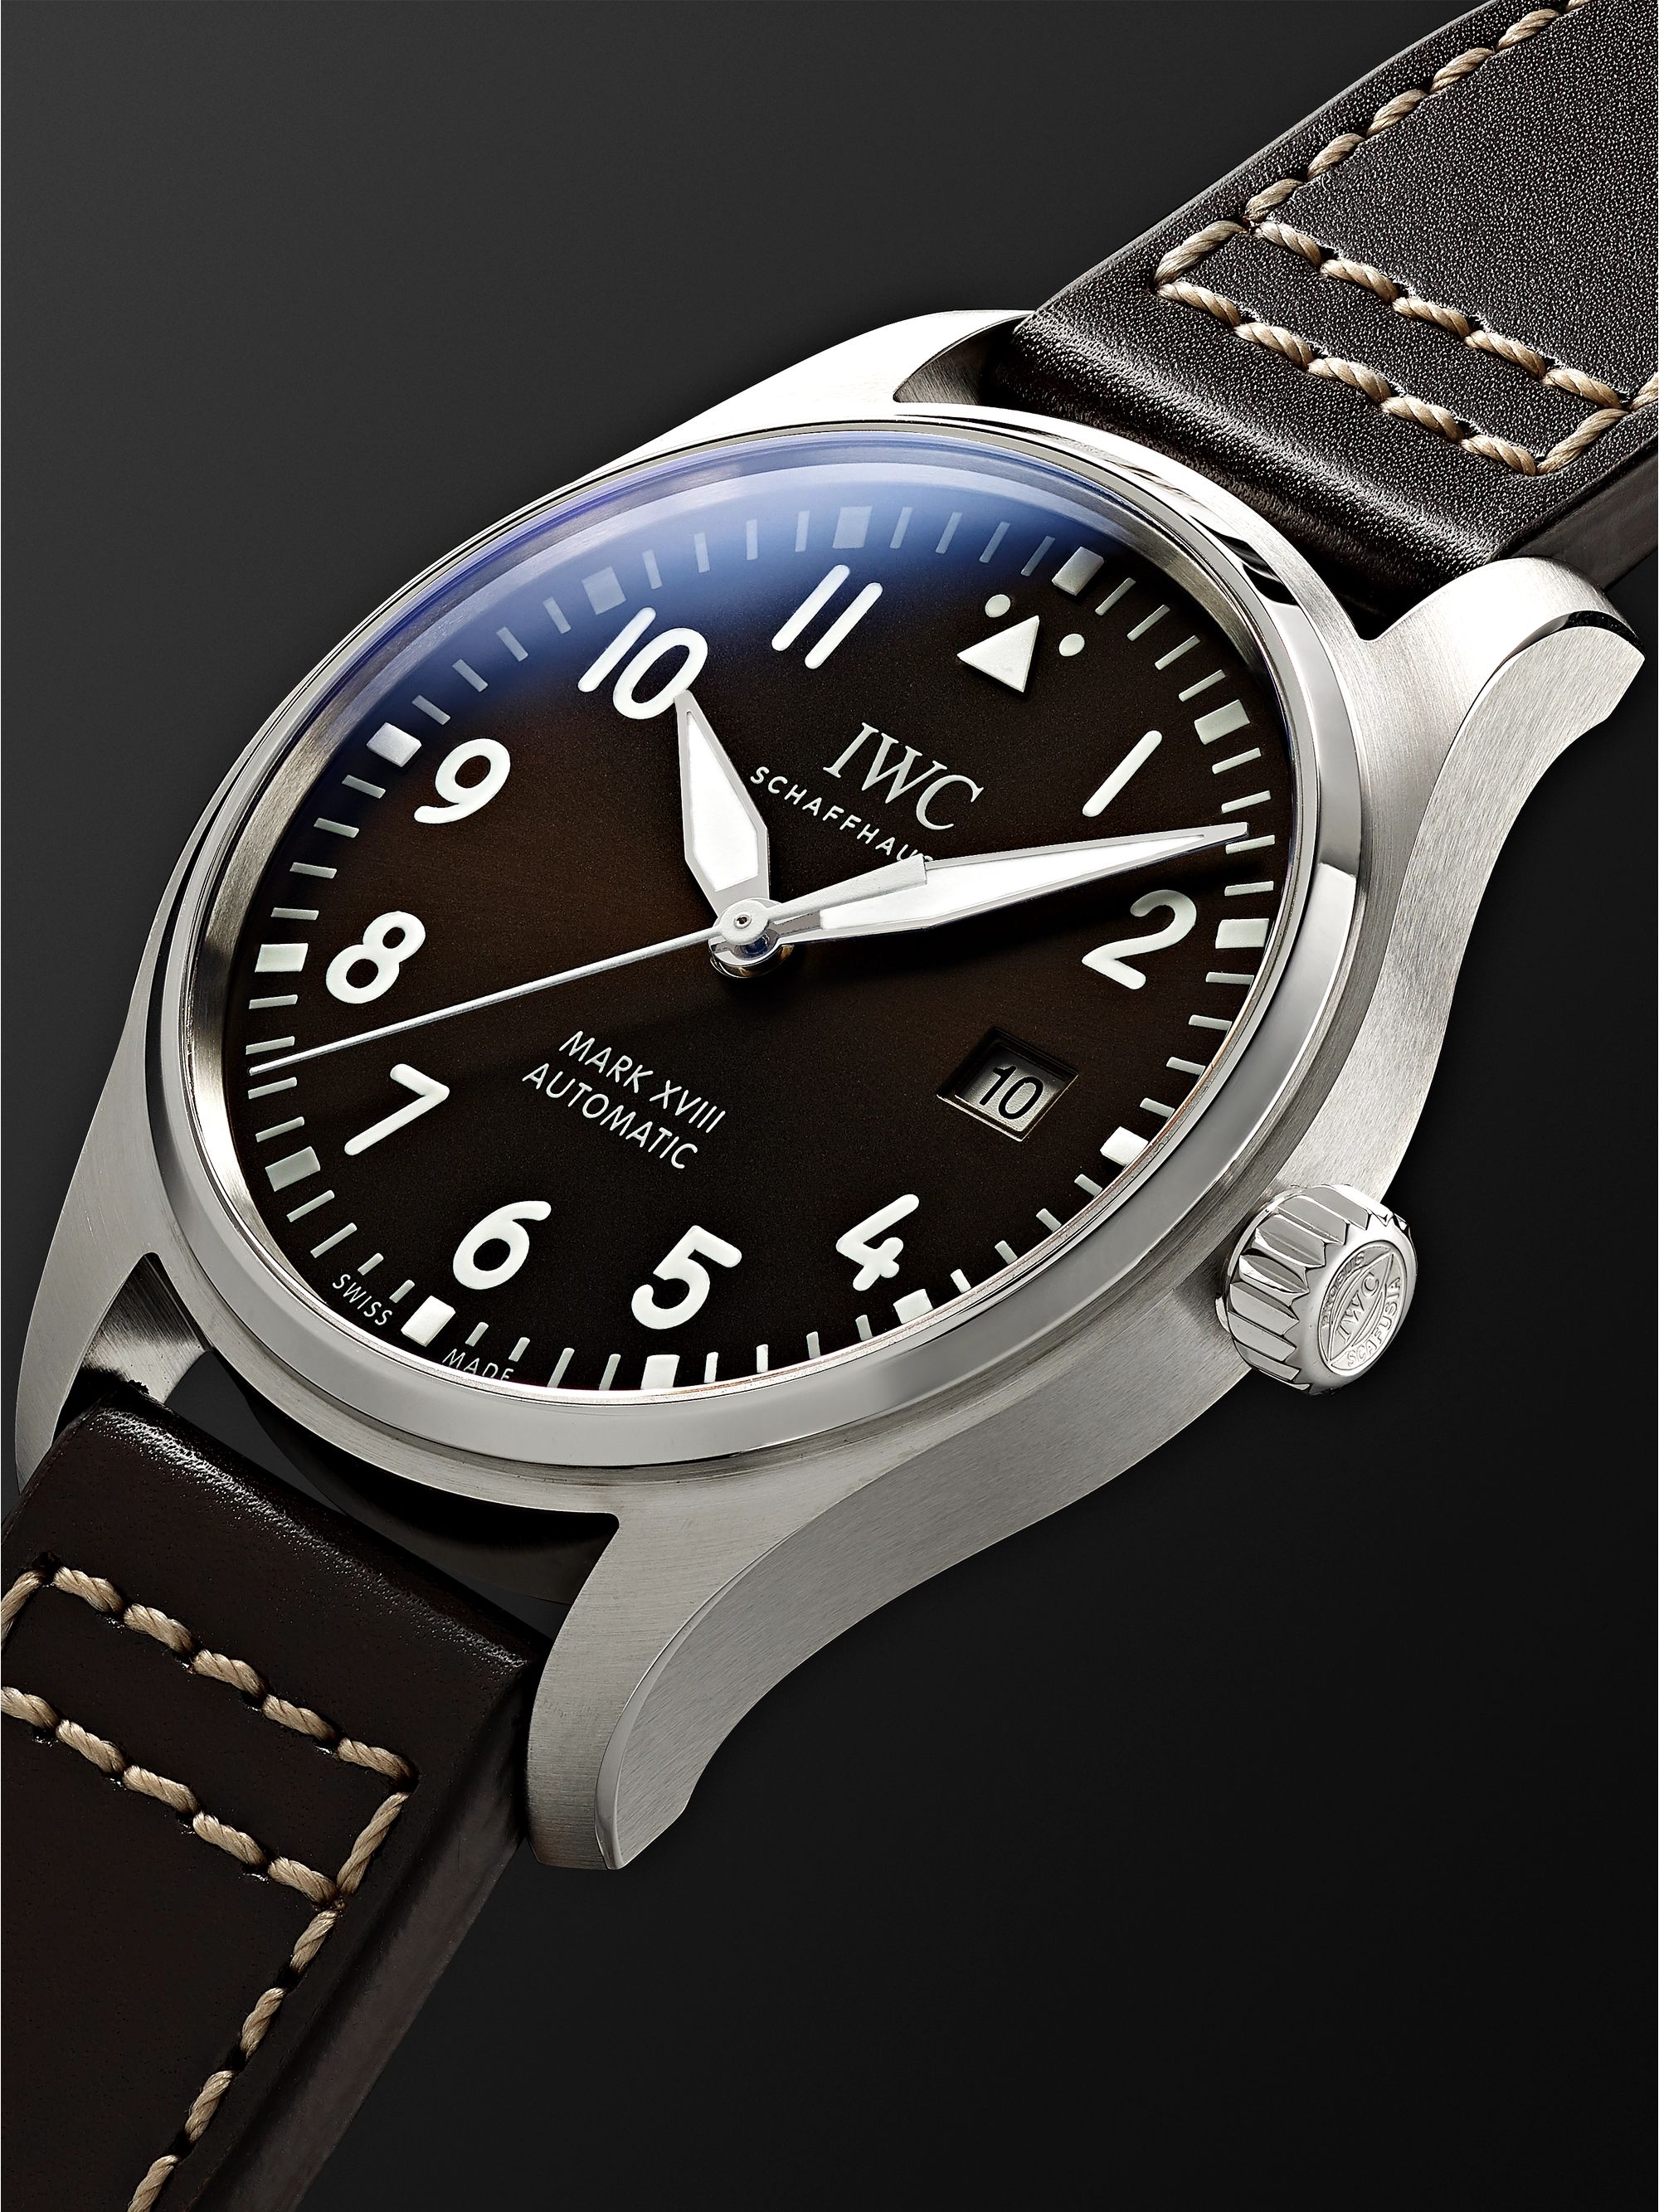 IWC SCHAFFHAUSEN Pilot's Mark XVIII Antoine de Saint Exupéry Edition Automatic 40mm Stainless Steel and Leather Watch, Ref. No. IW327003